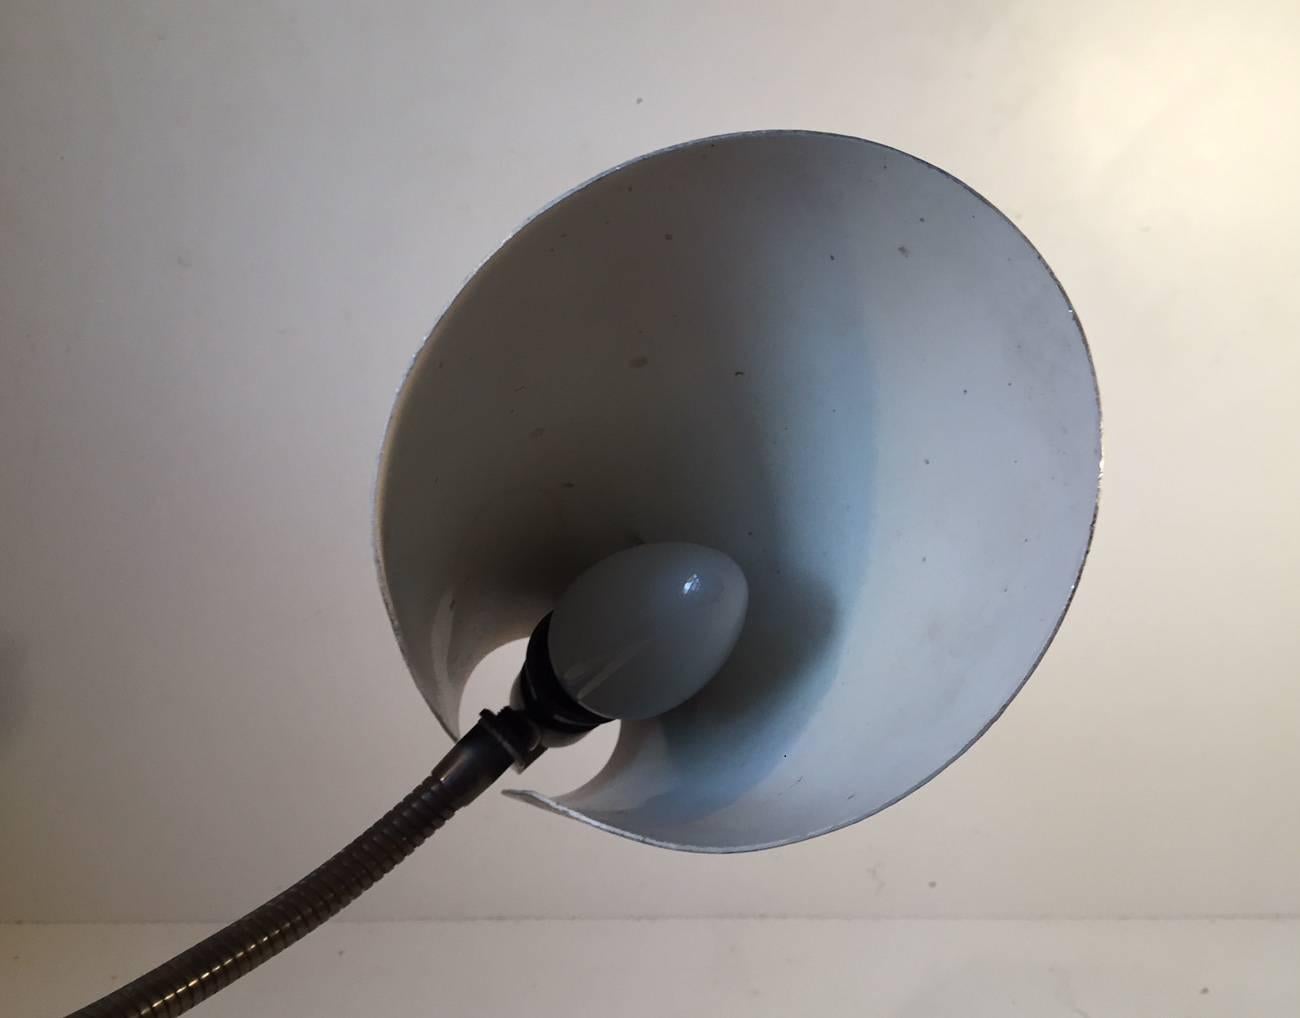 Powder-Coated Black Danish Wall Lamp with Brass Detailing by Fog & Mørup, 1950s For Sale